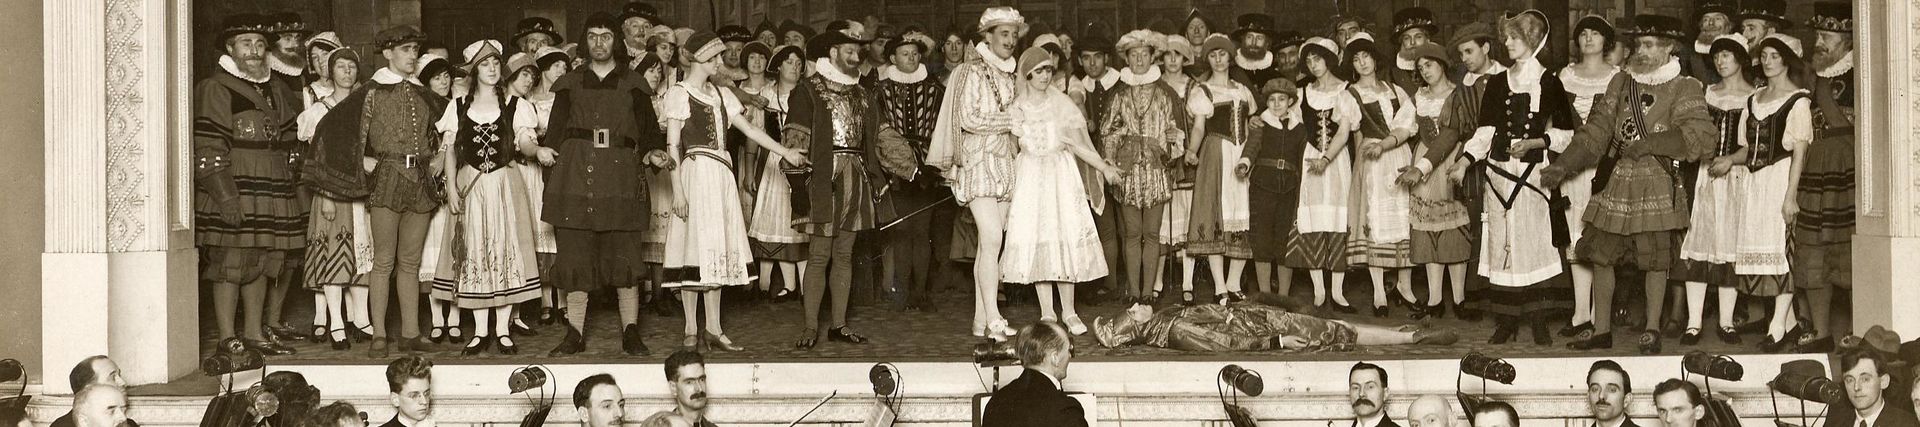  London Transport Music and Drama Society on stage during a performance, by Topical Press, 1924